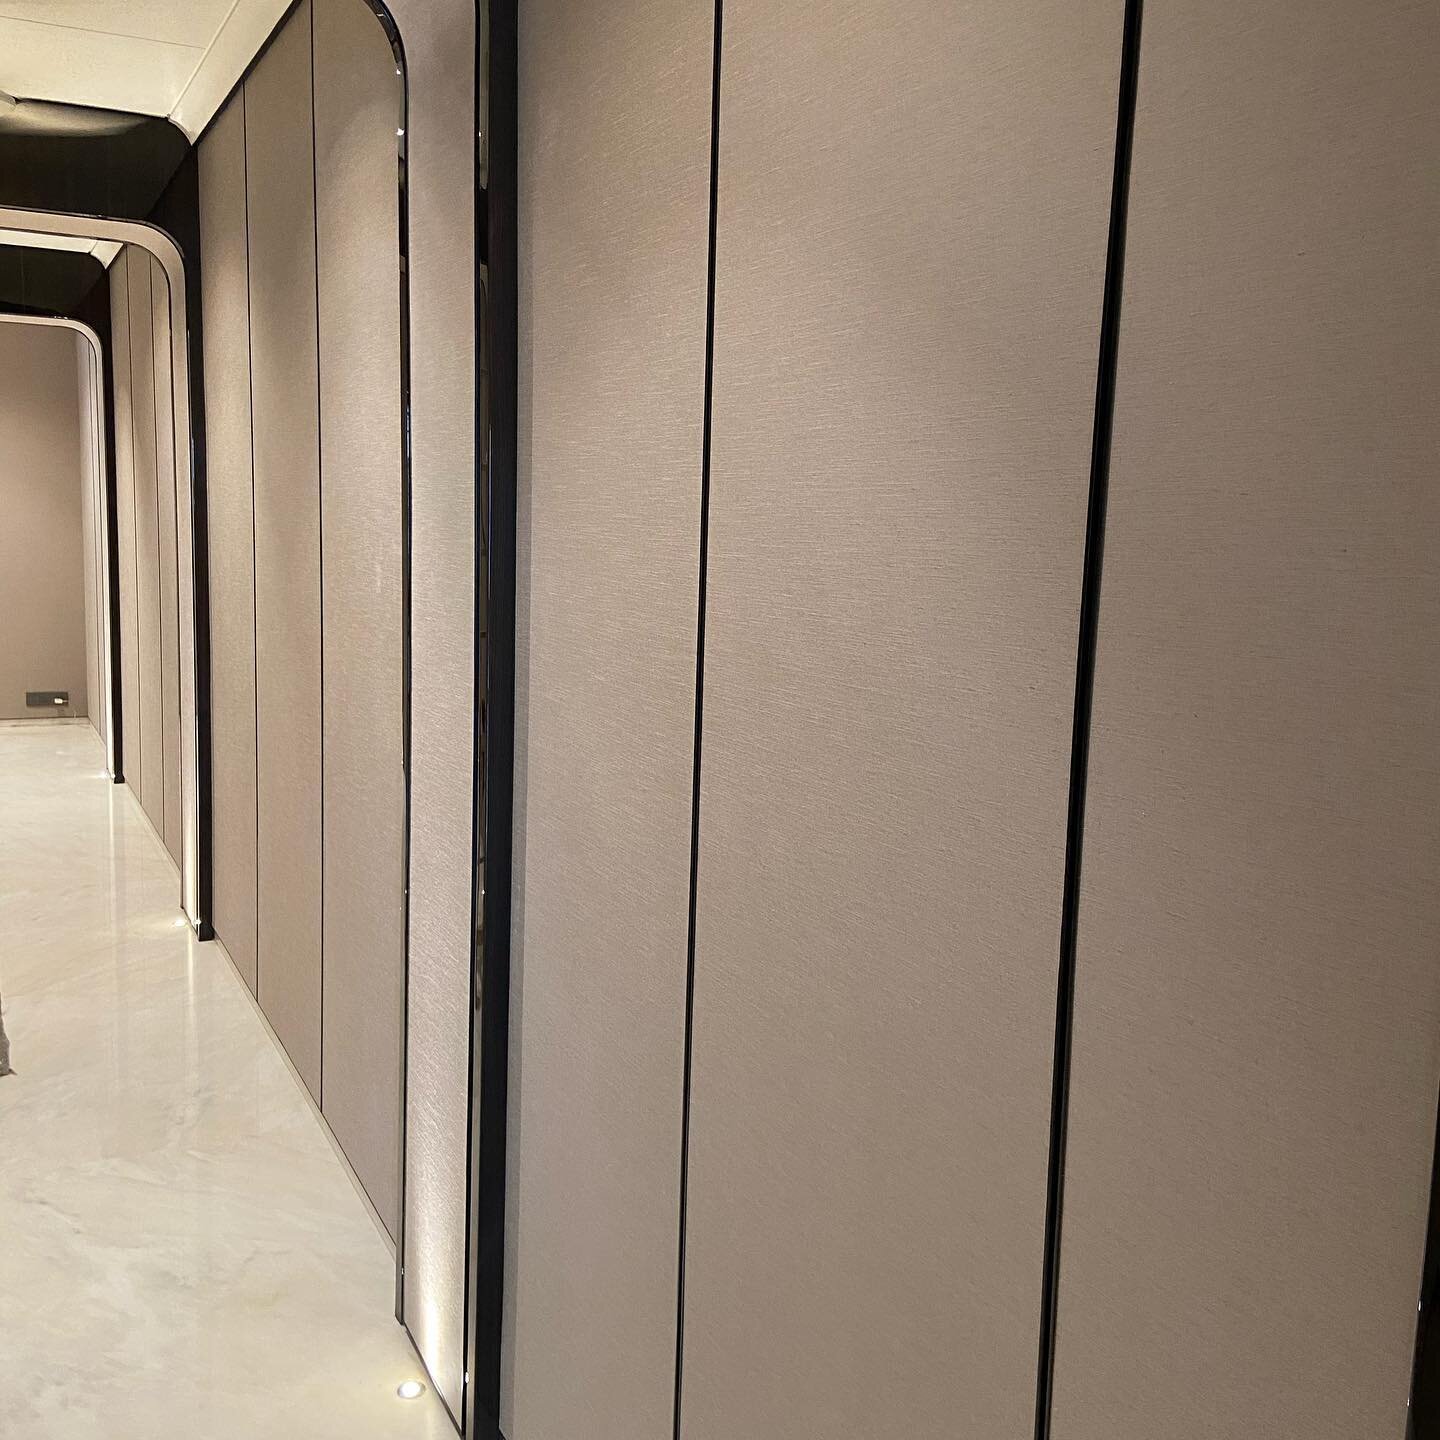 New site handover alert!!! Our Pure silk  wallpaper adorn these passageways ending it with a mural. Apartment in the clouds. Ultra Lux interiors by @interworldfurnishings installation is the key. We have trained professionals who take immense pride i